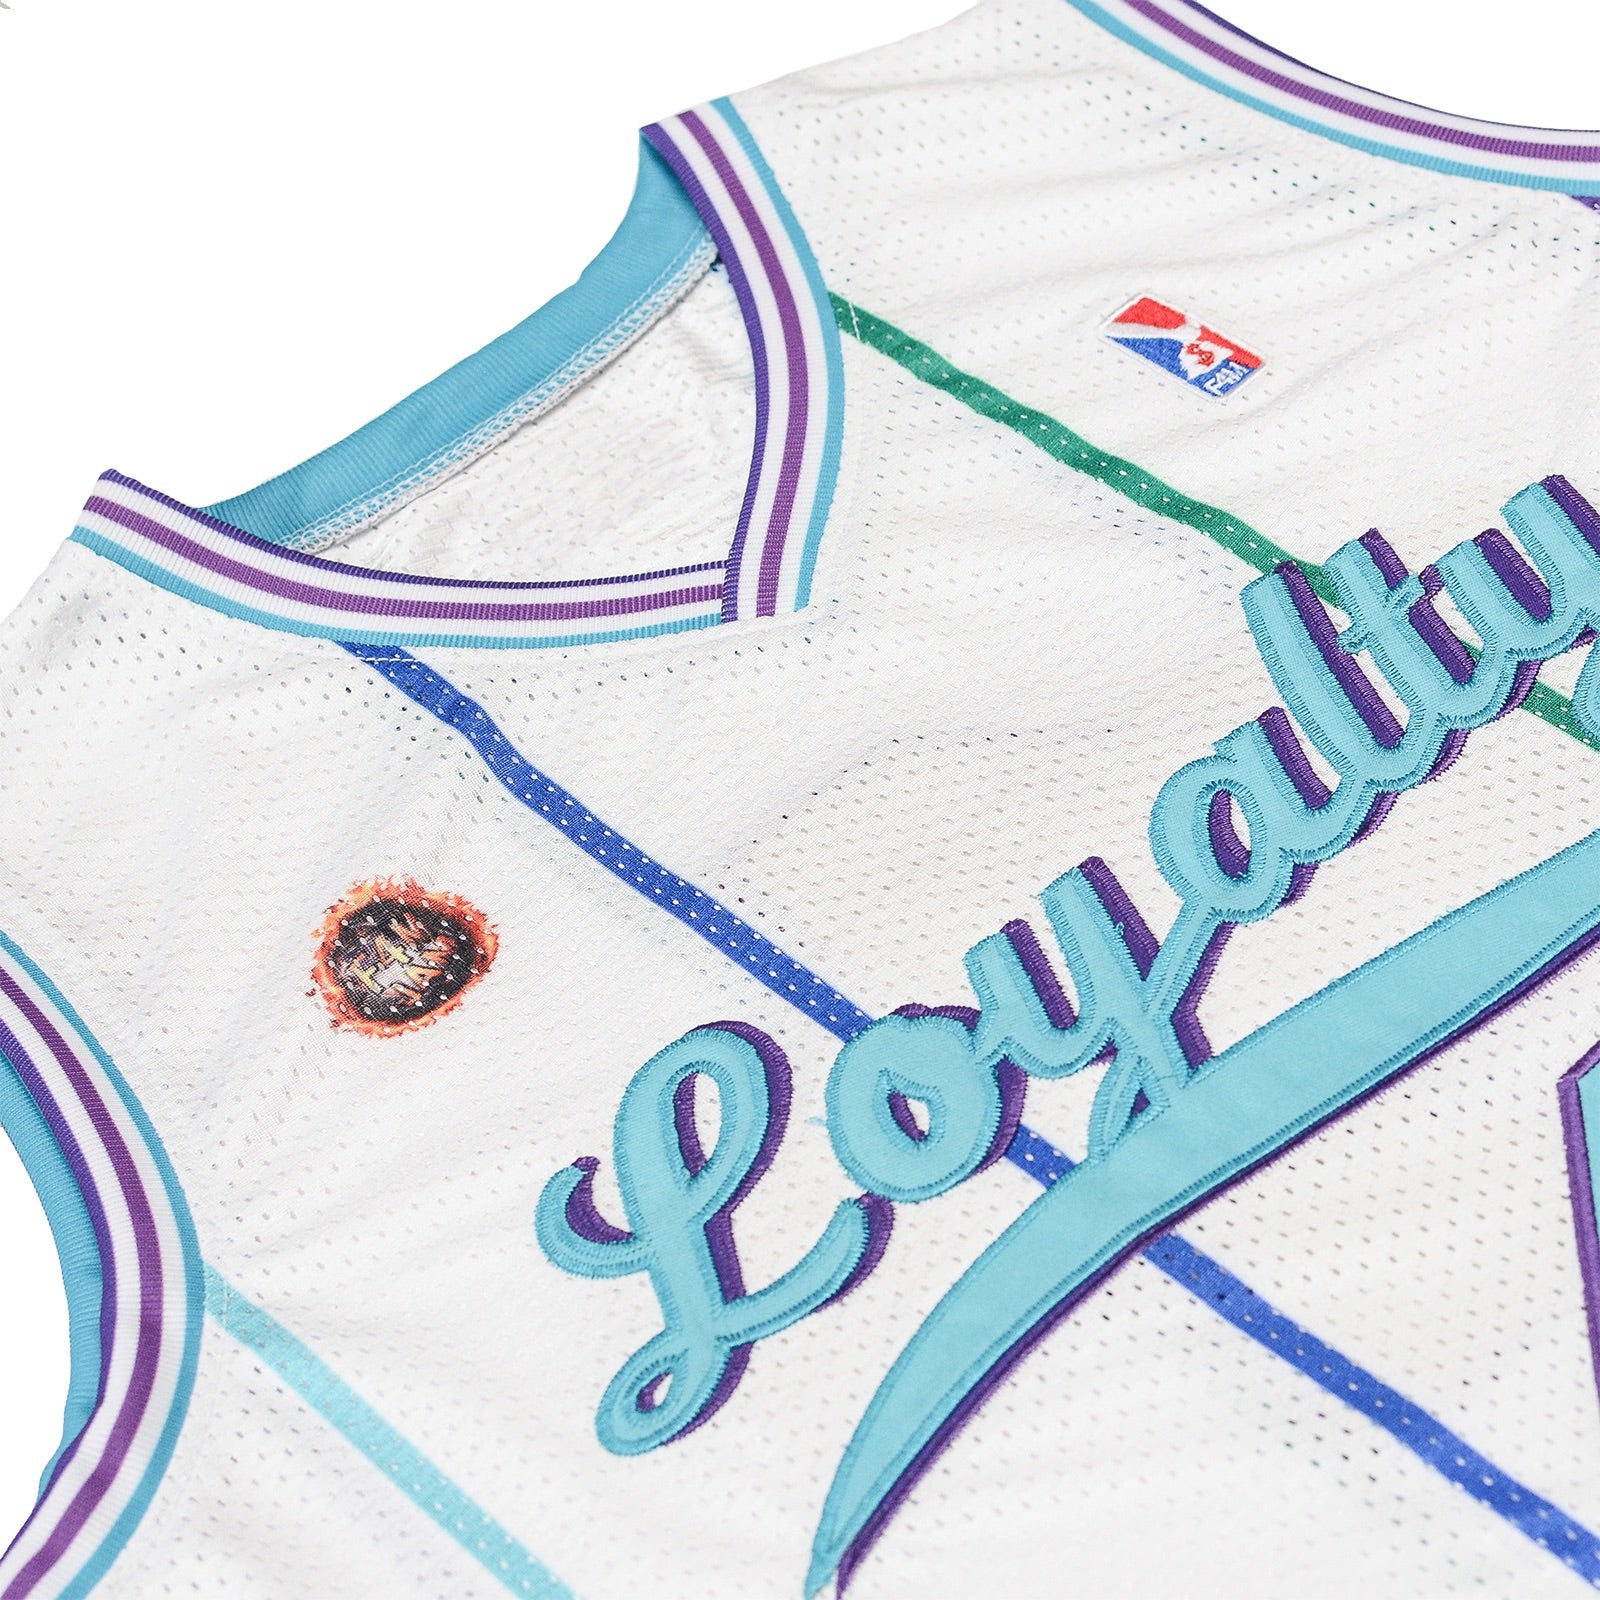 The Loyalty Basketball Jersey in Purple – F4mily Matters